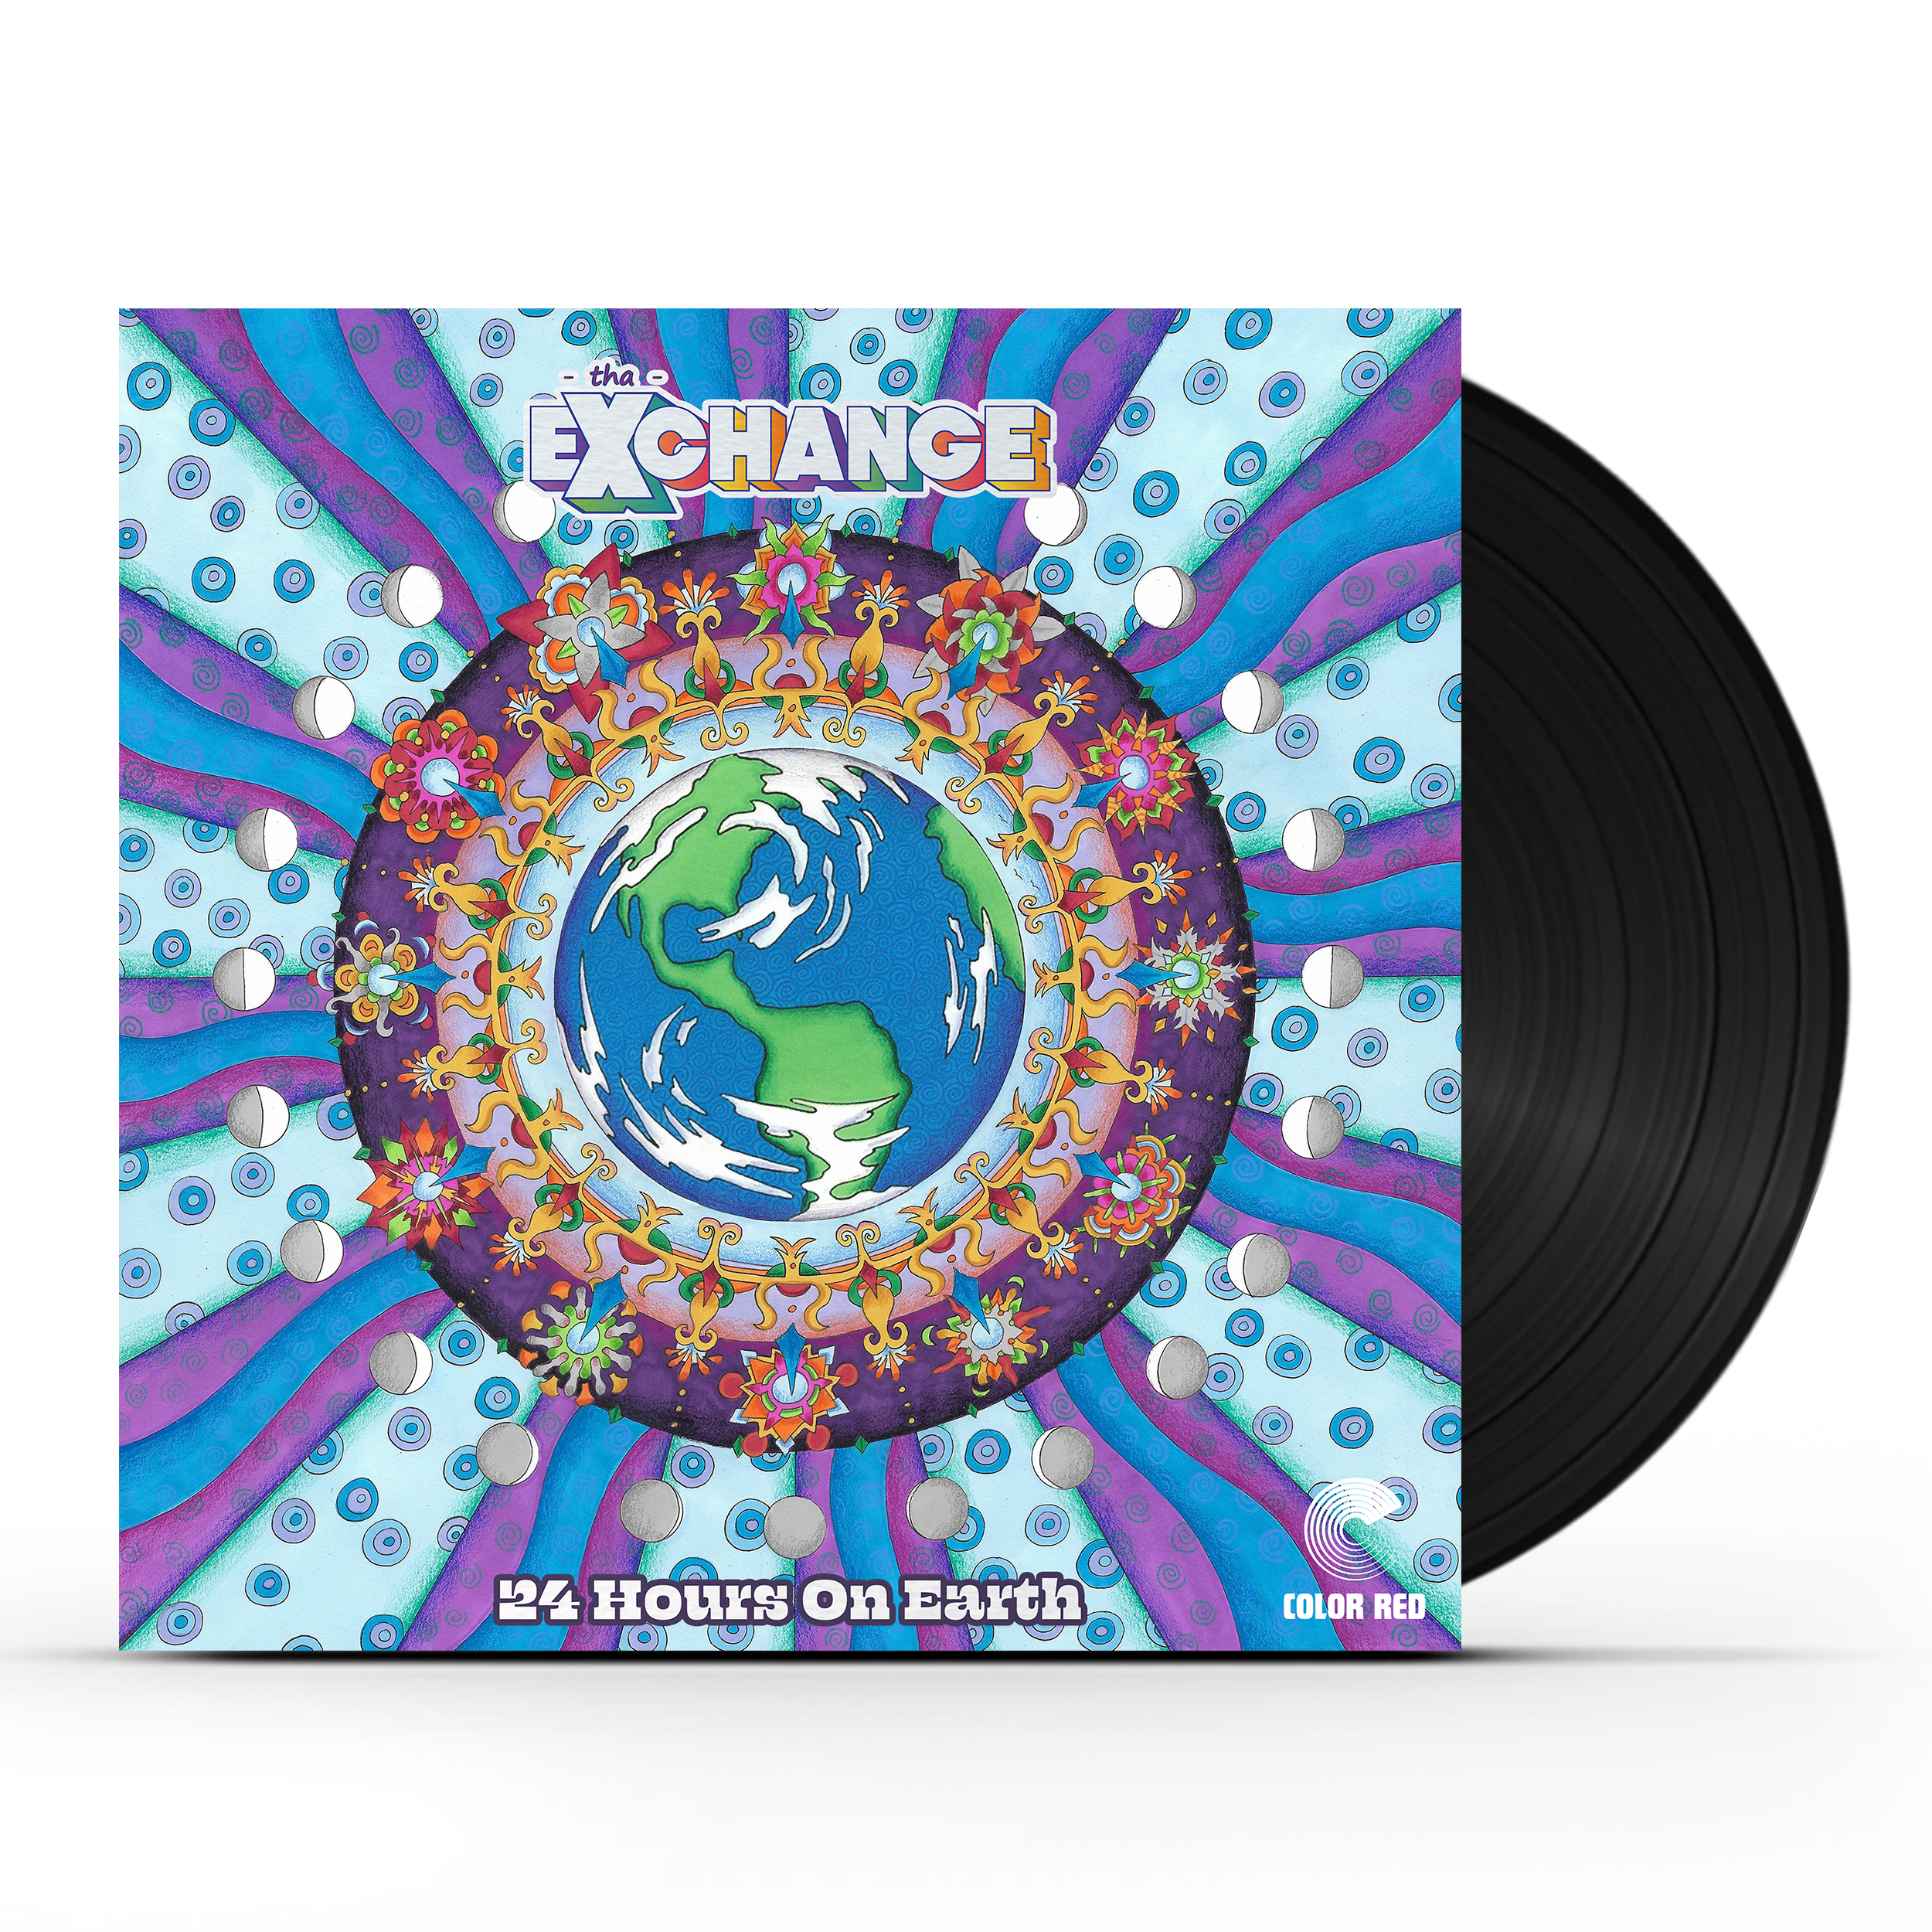 PRE-ORDER: Tha Exchange - 24 Hours On Earth (LP)